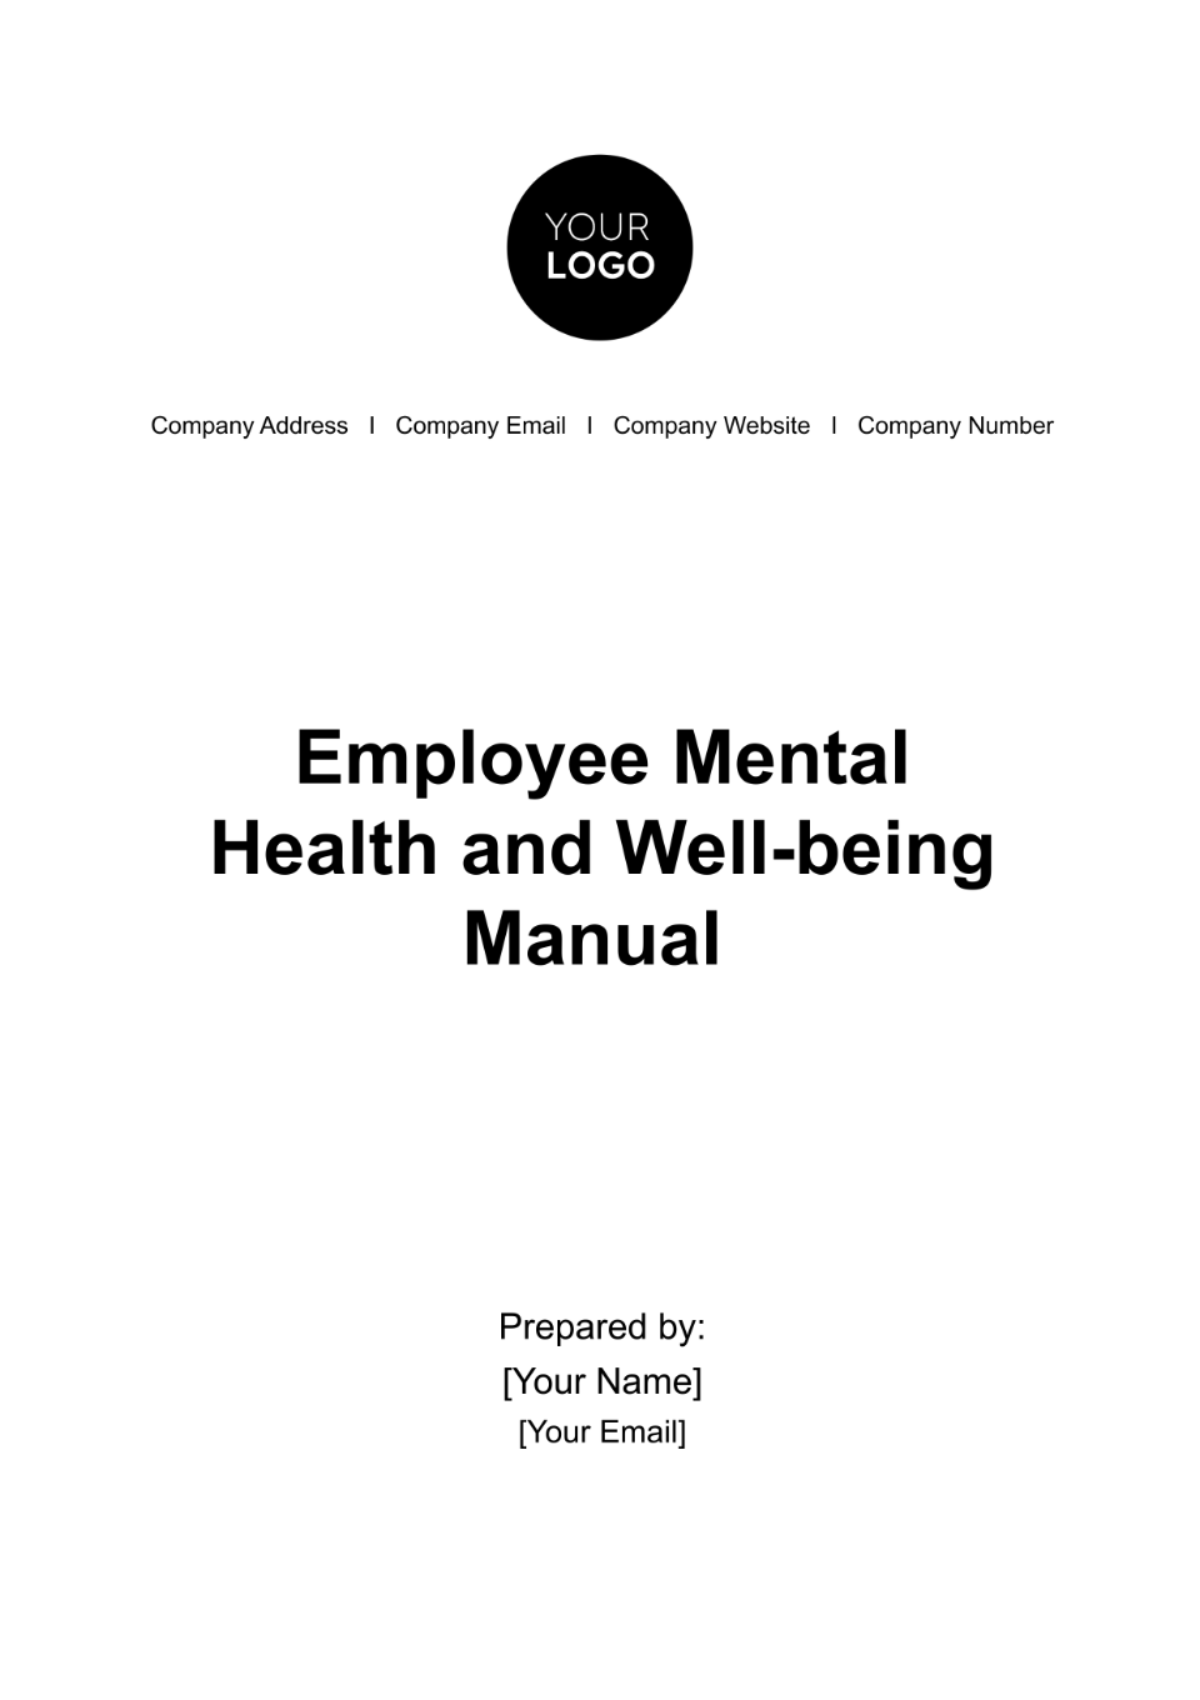 Free Employee Mental Health and Well-being Manual HR Template